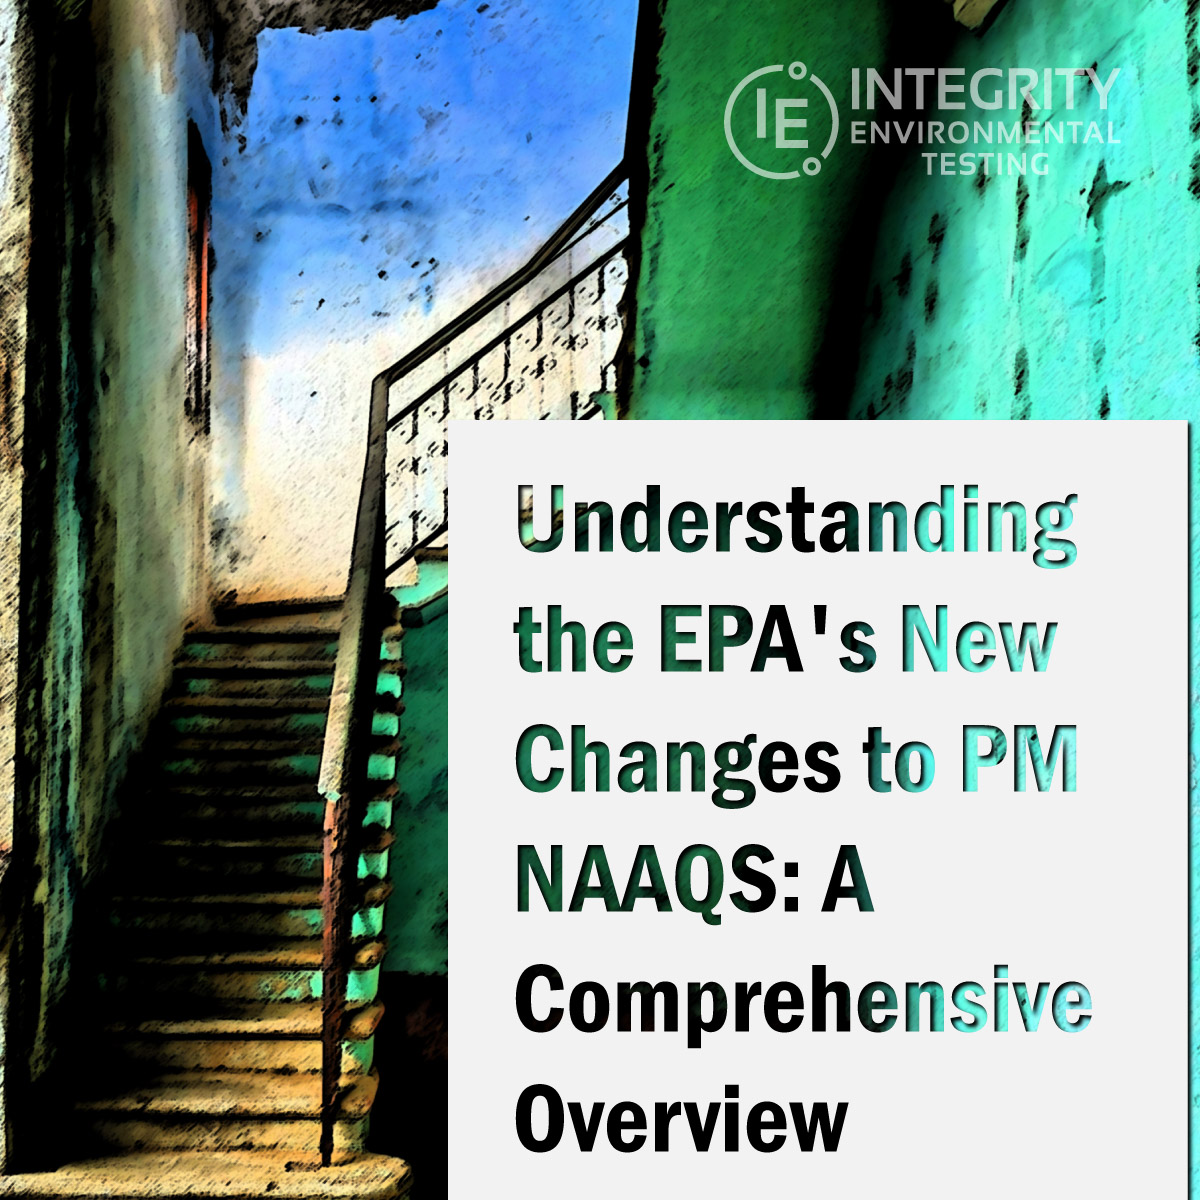 Understanding the EPA’s New Changes to PM NAAQS: A Comprehensive Overview